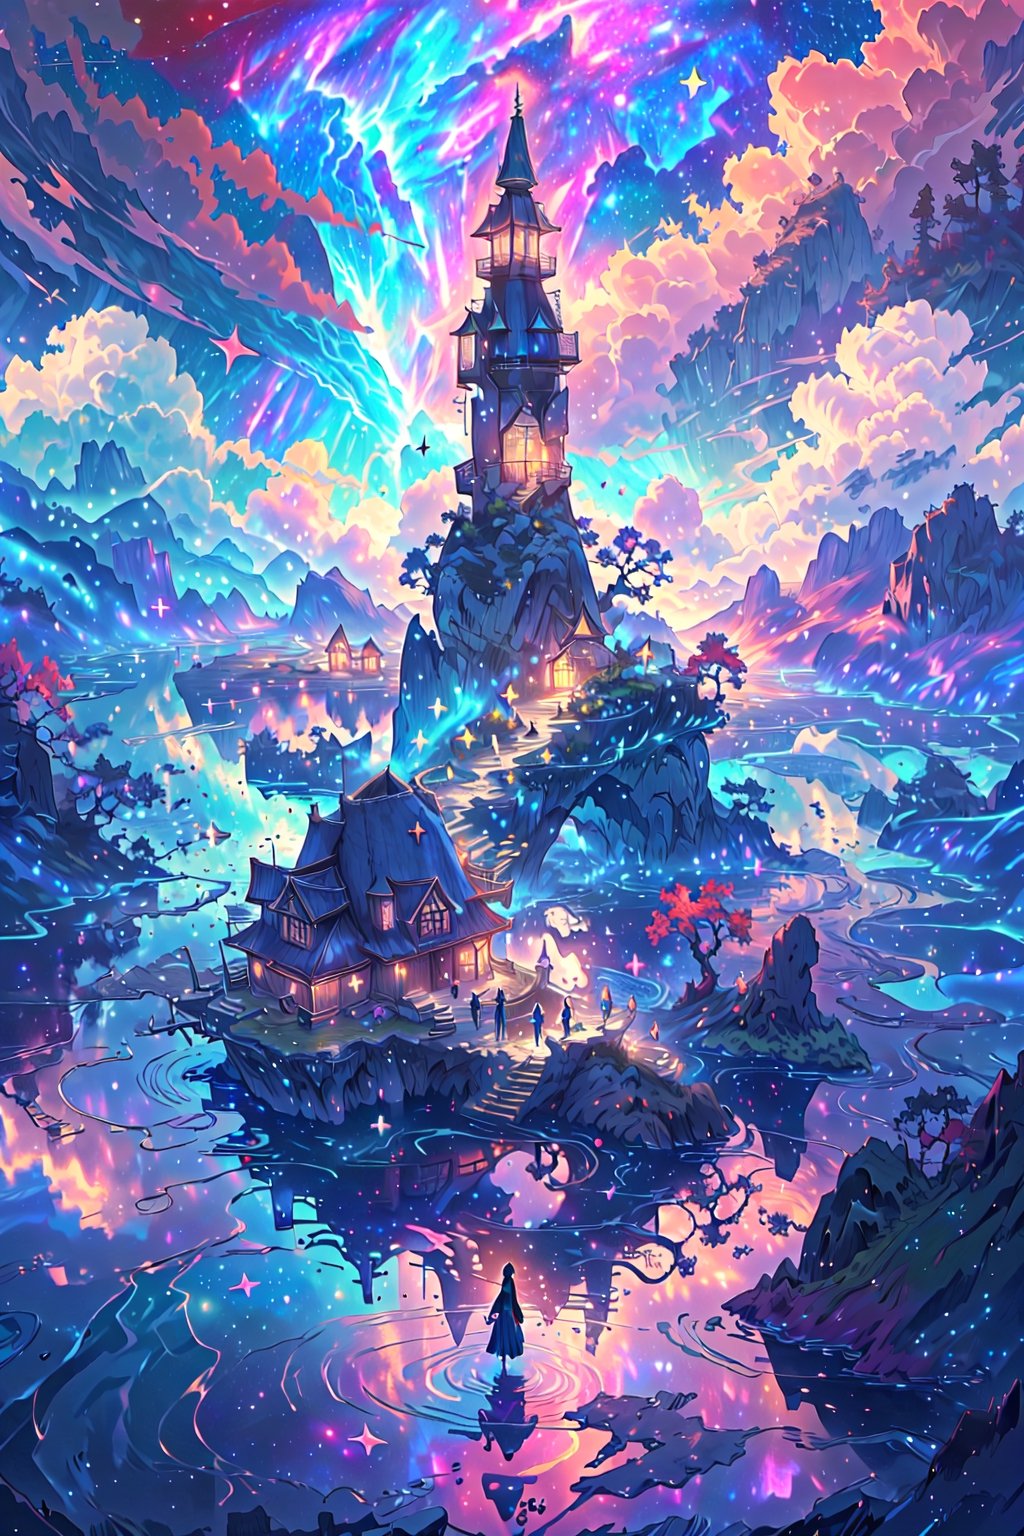 more detail 1:1.nature.,pastelbg,rapthr, stars, house,fantasy00d,xuer dreamy landscapes,Isometric,Isometric view, female,.flow, woman, tower, lake, clouds in the galaxy